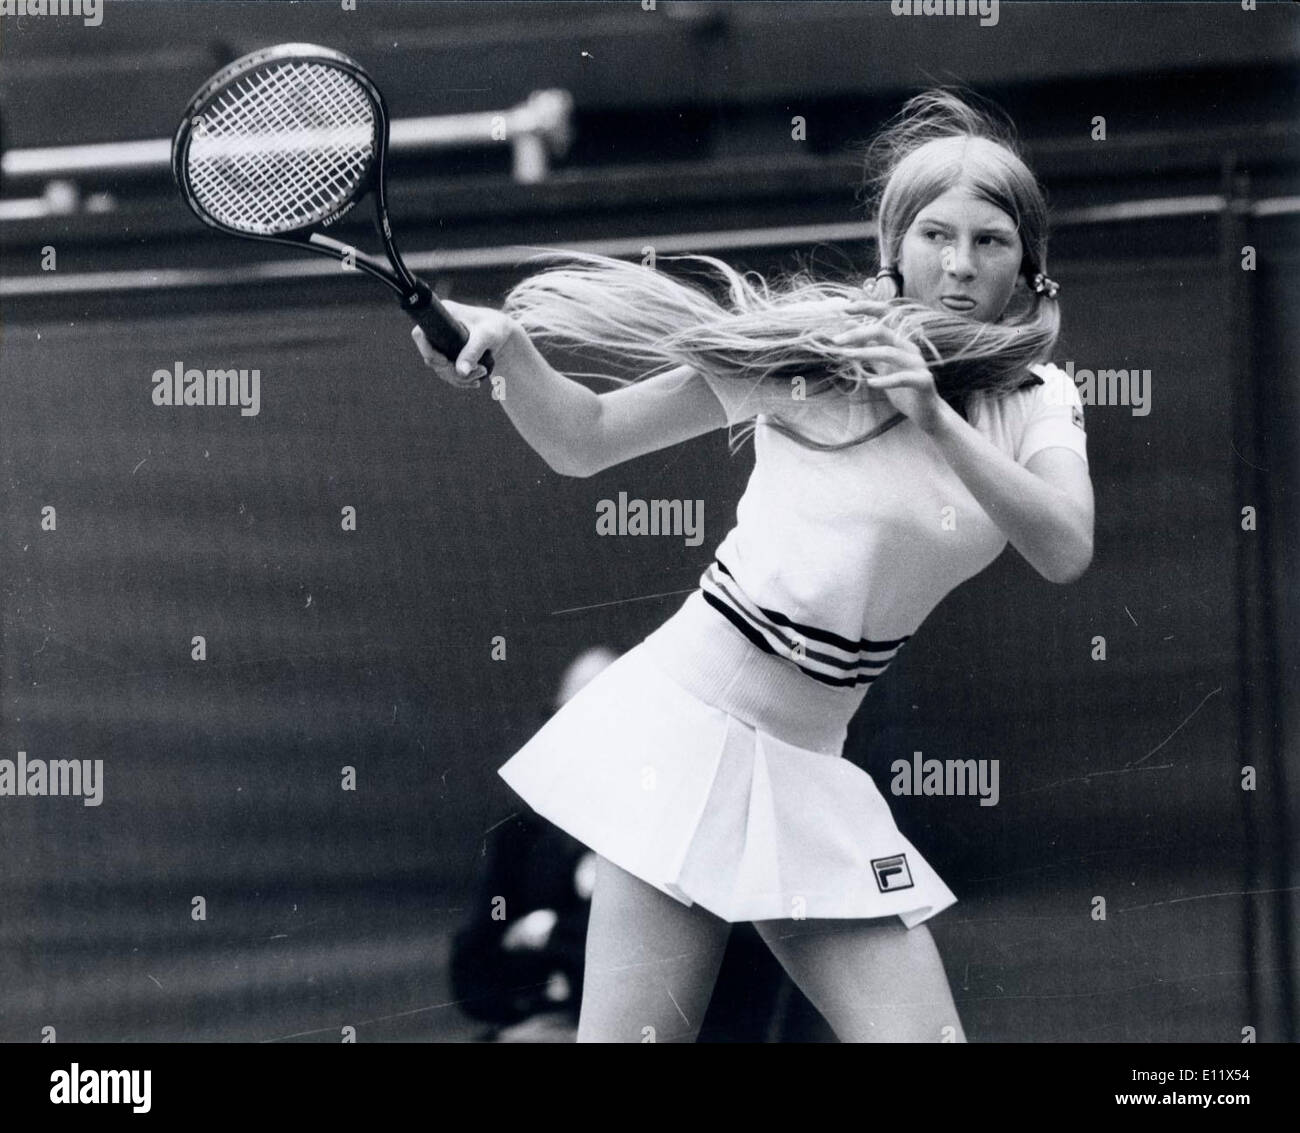 Jun 30, 1980 - London, England, United Kingdom - ANDREA JAEGER in action against Britain's Virginia Wade at Wimbledon. She would go on to beat Wade and become the youngest quarterfinalist in the history of the tournament. Stock Photo